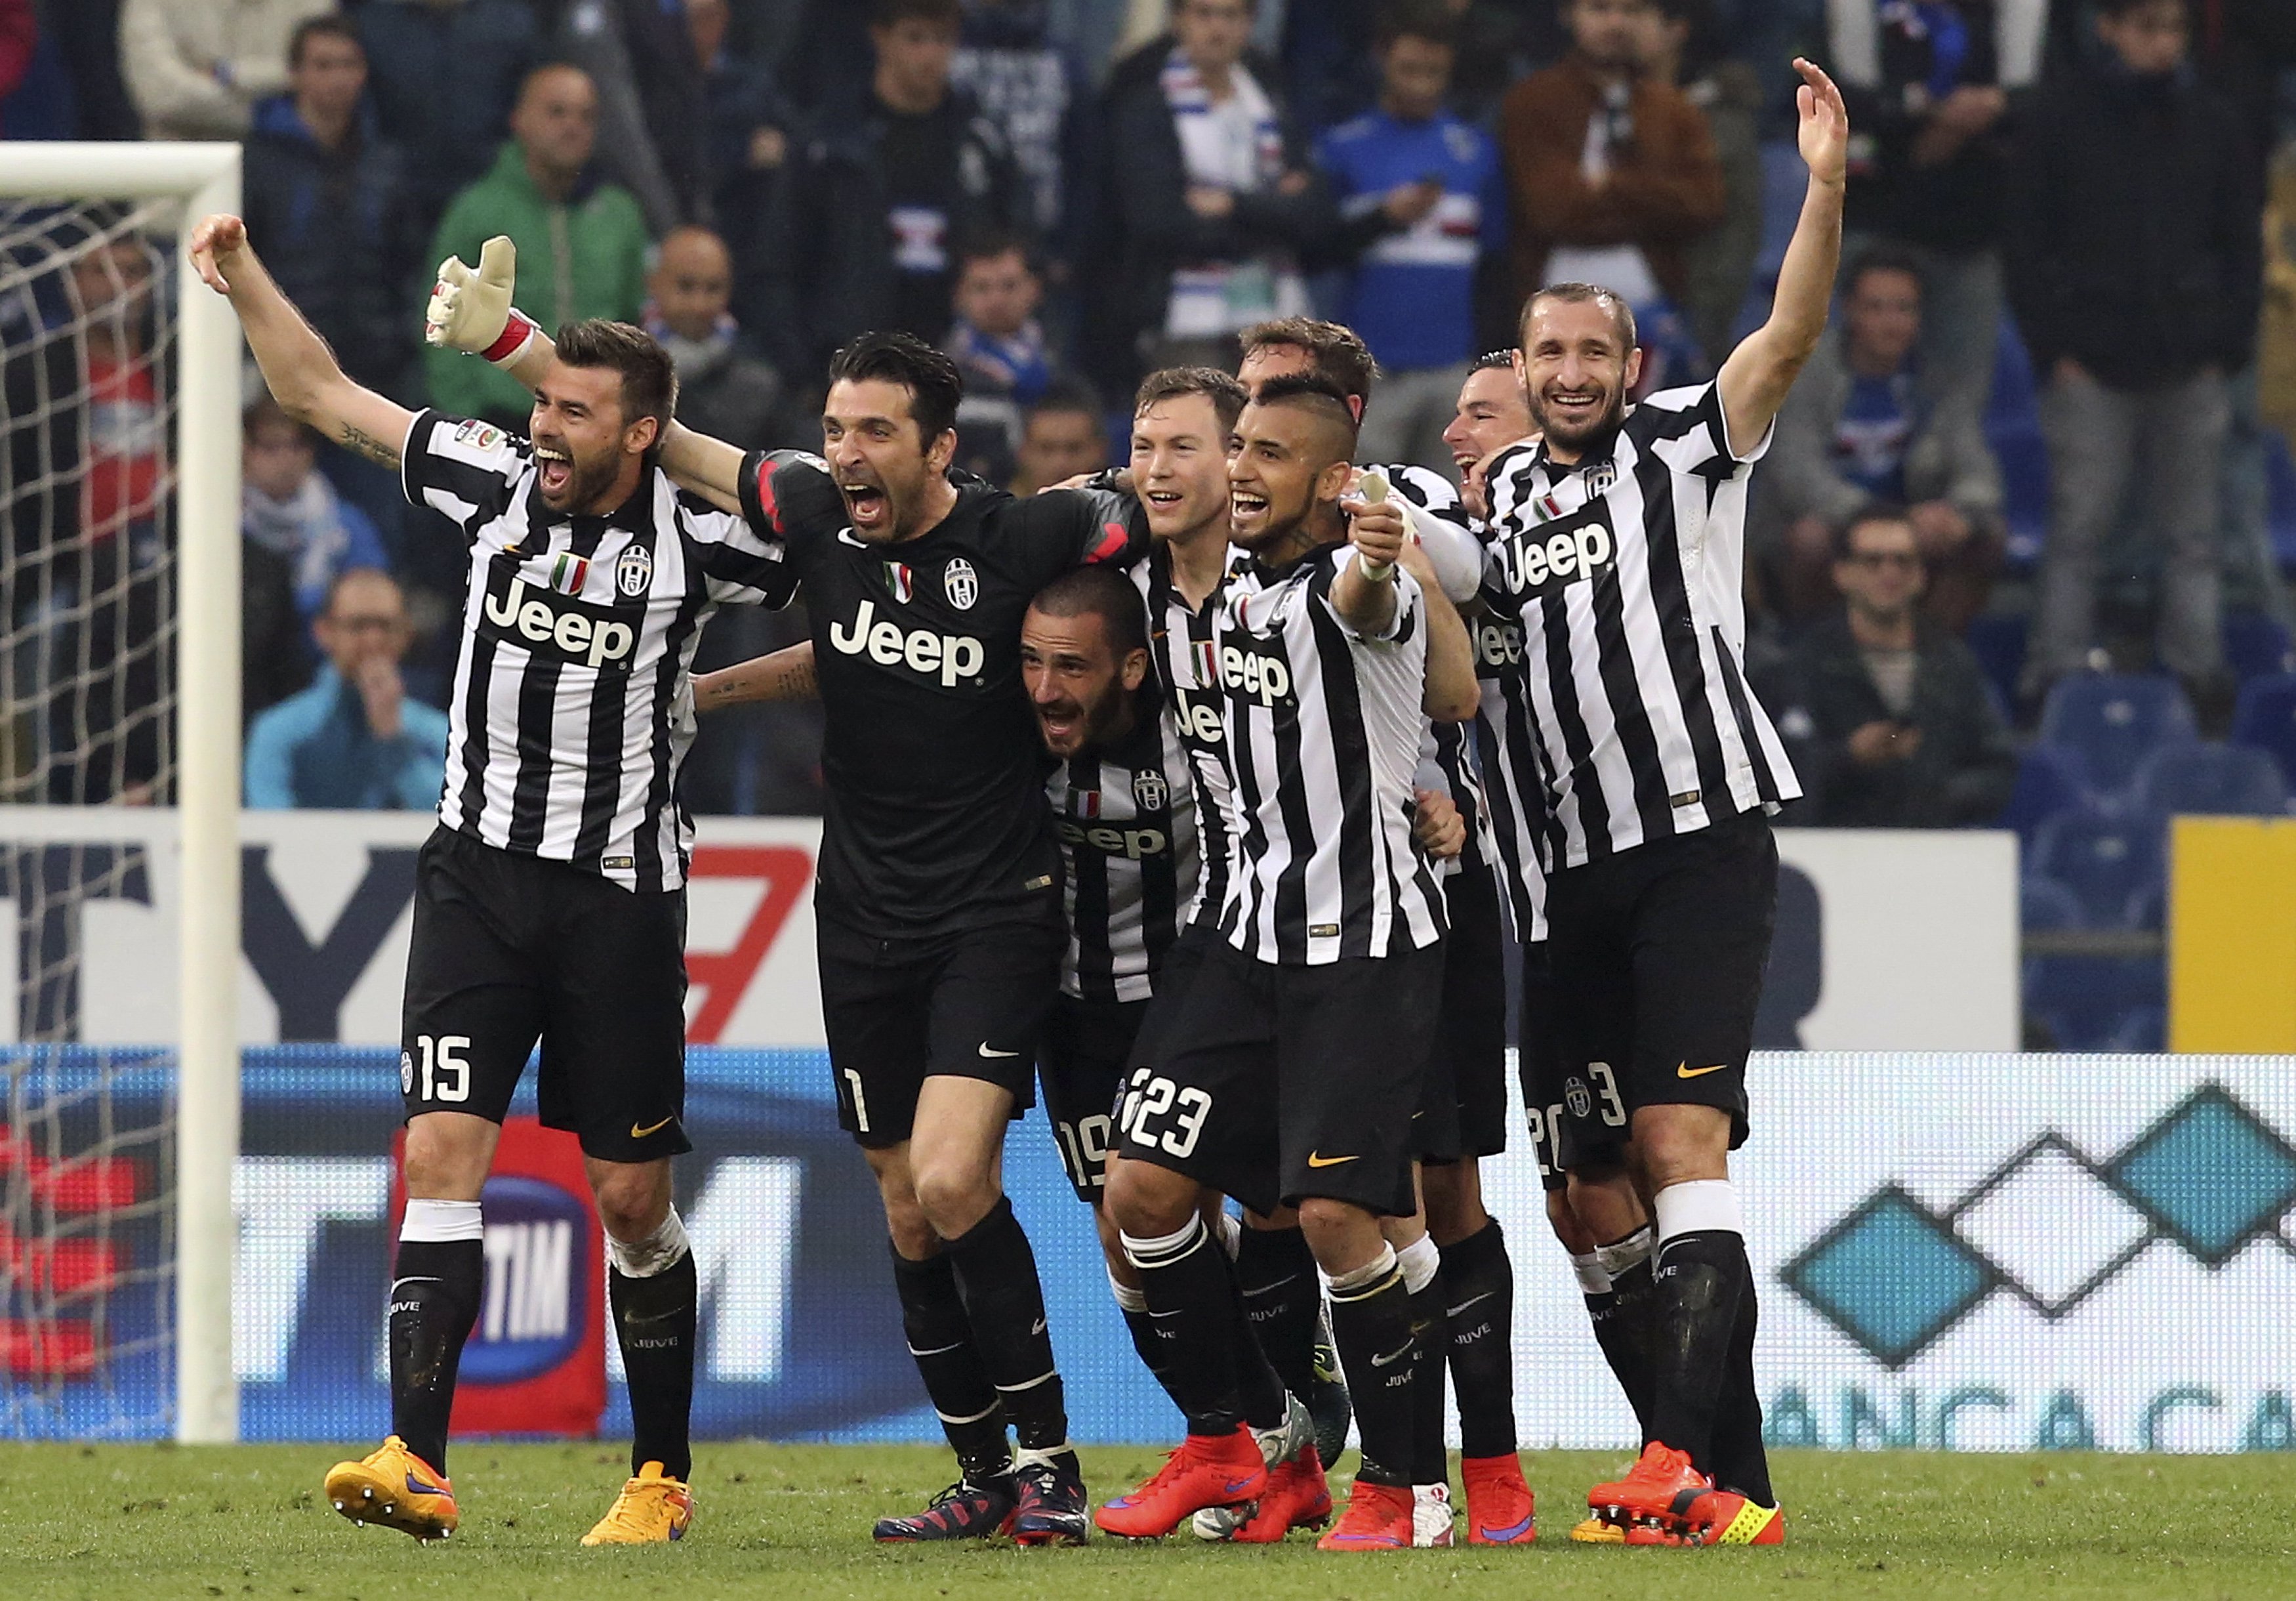 Juventus' players celebrate at the end of their Serie A soccer match against Sampdoria at the Marassi stadium in Genoa, Italy May 2, 2015. Juventus won a fourth successive Serie A crown, and their first under coach Massimiliano Allegri, by beating Sampdoria 1-0 on Saturday. REUTERS/Stefano Rellandini TPX IMAGES OF THE DAY